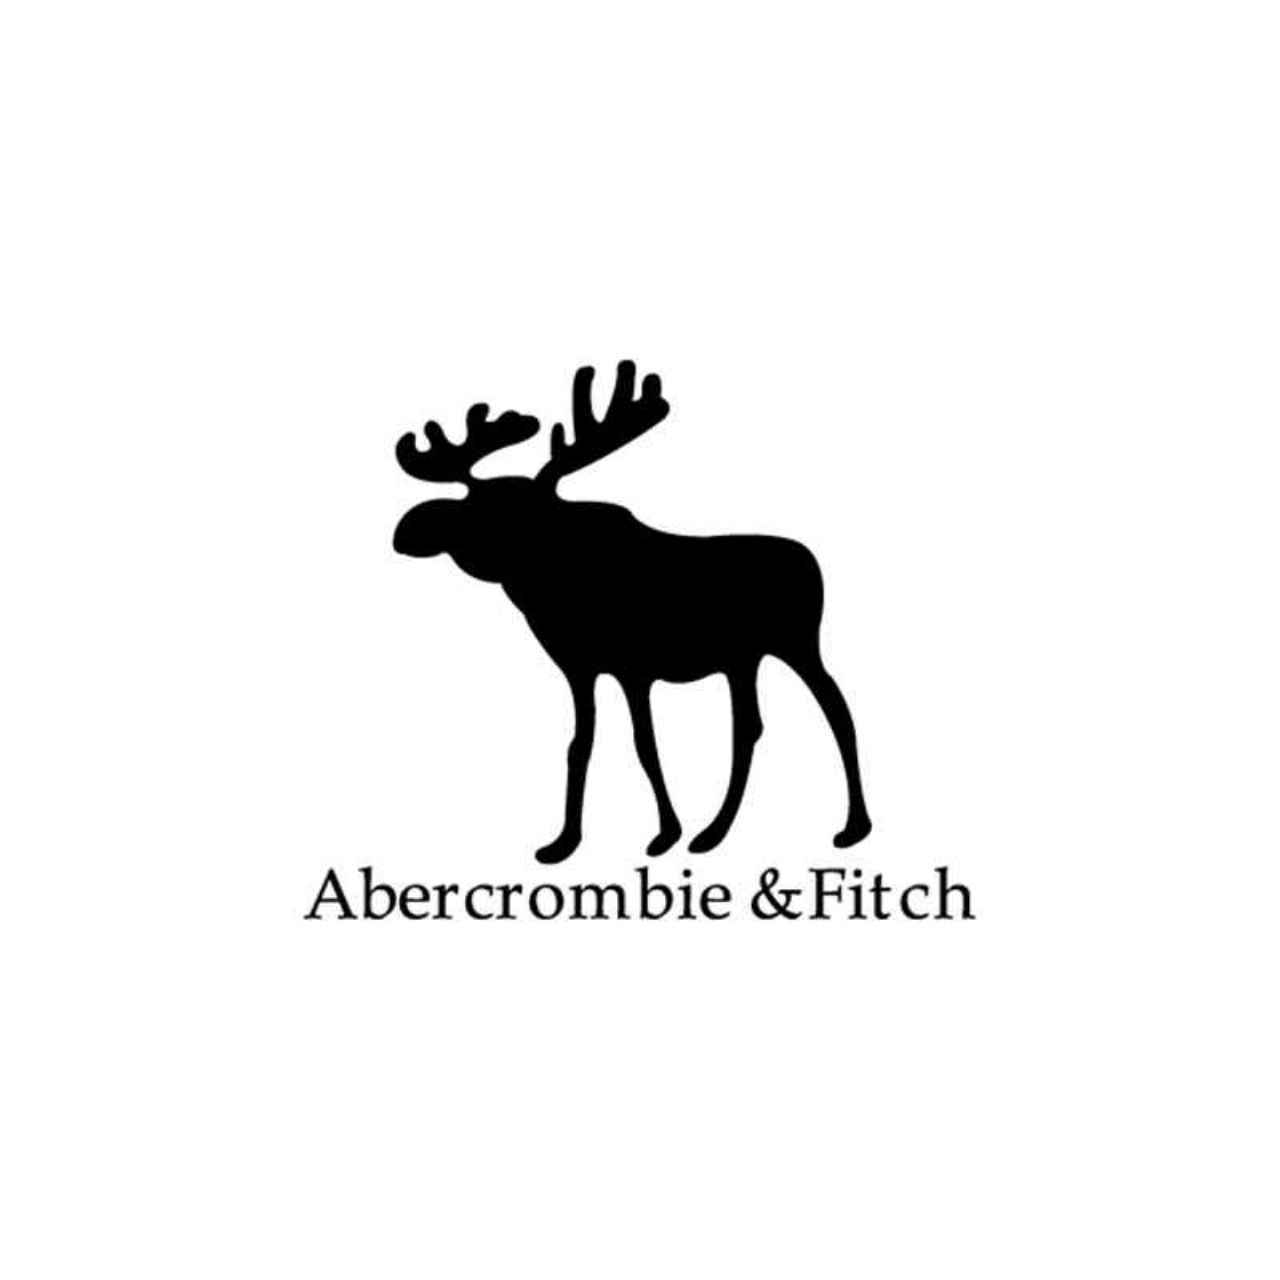 Abercrombie and Fitch Logo - Abercrombie And Fitch Logo Decal Sticker